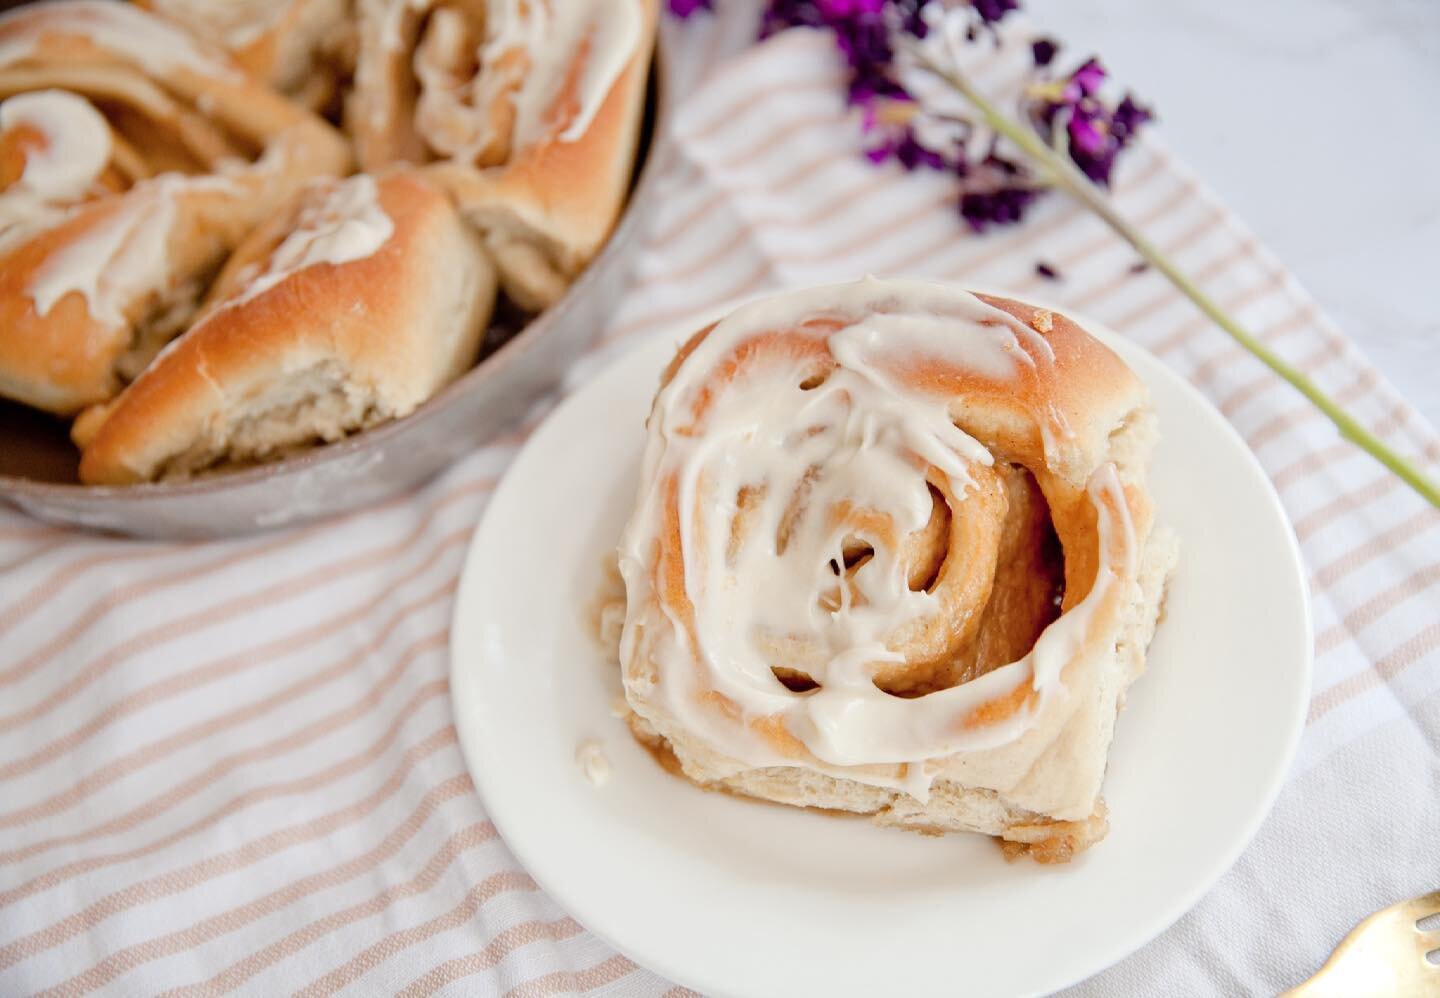 These Maple Rolls are one of my husband&rsquo;s favorites, so he asked me to make them for him this week for his coworkers. So I figured it was time to transfer this recipe over to the blog. 

I love swapping out Cinnamon Rolls for Maple rolls- it&rs